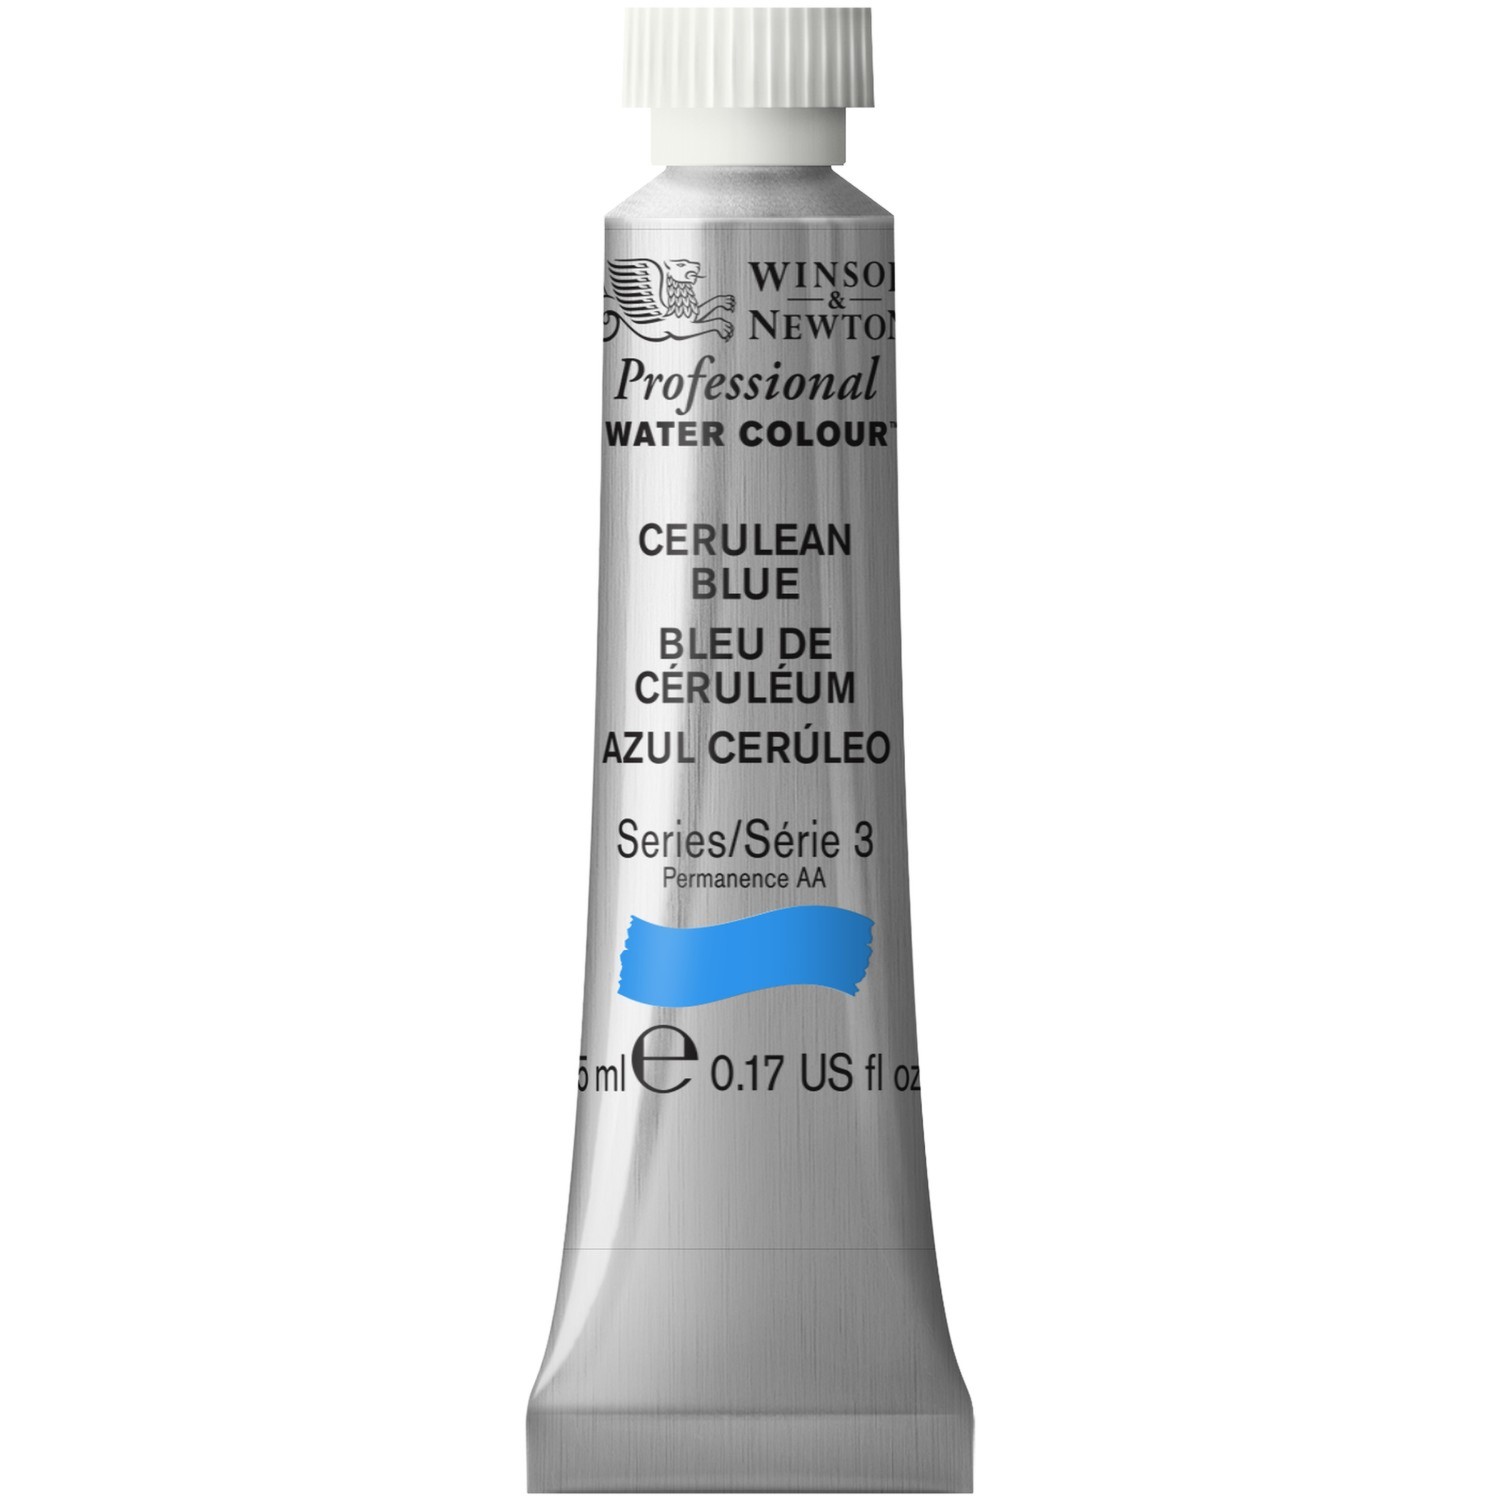 Winsor and Newton 5ml Professional Watercolour Paint - Cerulean Blue Image 1